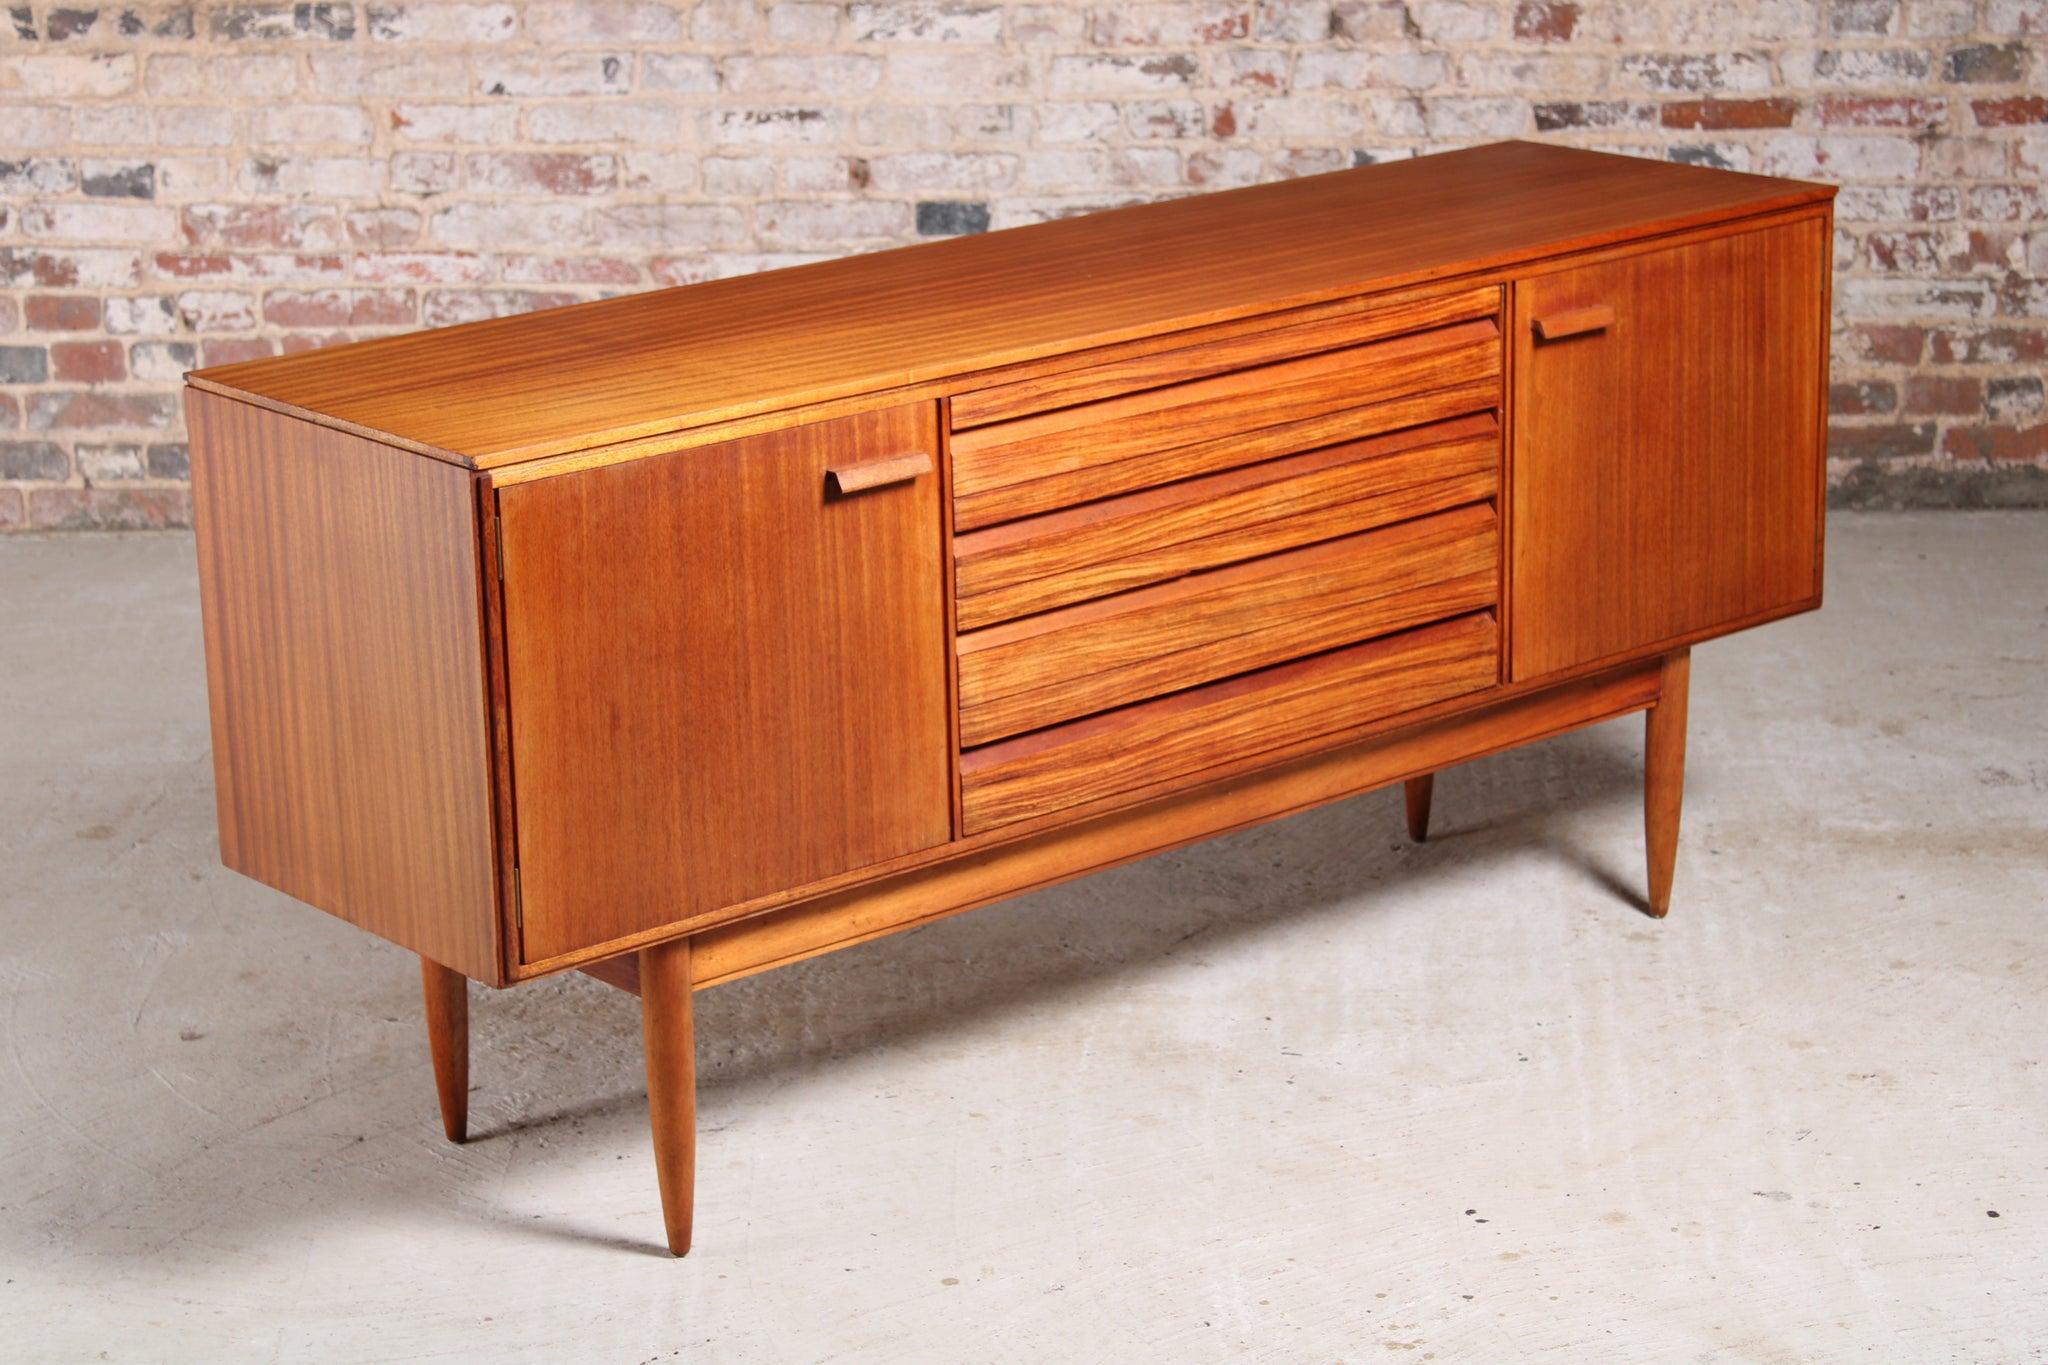 Mid-century mahogany and rosewood sideboard by White & Newton, Portsmouth, circa 1950s. 2 cabinet sections with shelves and 4 drawers with solid rosewood fronts. Top drawer has a cutlery section.

Dimension: W 168 cm x D 46 cm x H 76 cm.